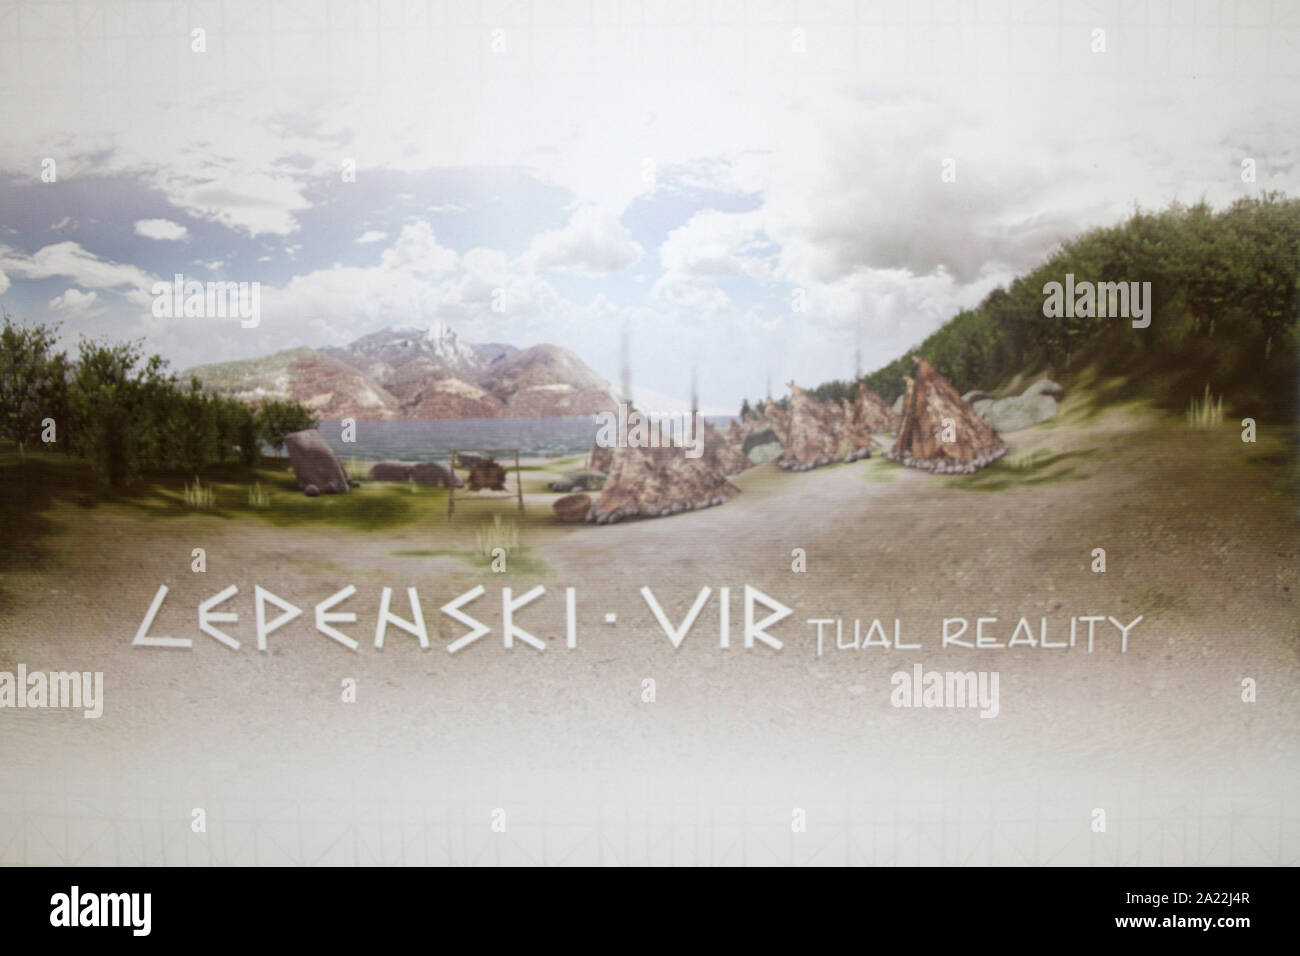 LEPENSKI VIRtual REALITY poster for a presentation at Lepenski Vir AKA Lepena Whirlpool, archaeological site of the Mesolithic Iron Gates culture of the Balkans, Boljetin, Serbia. Stock Photo